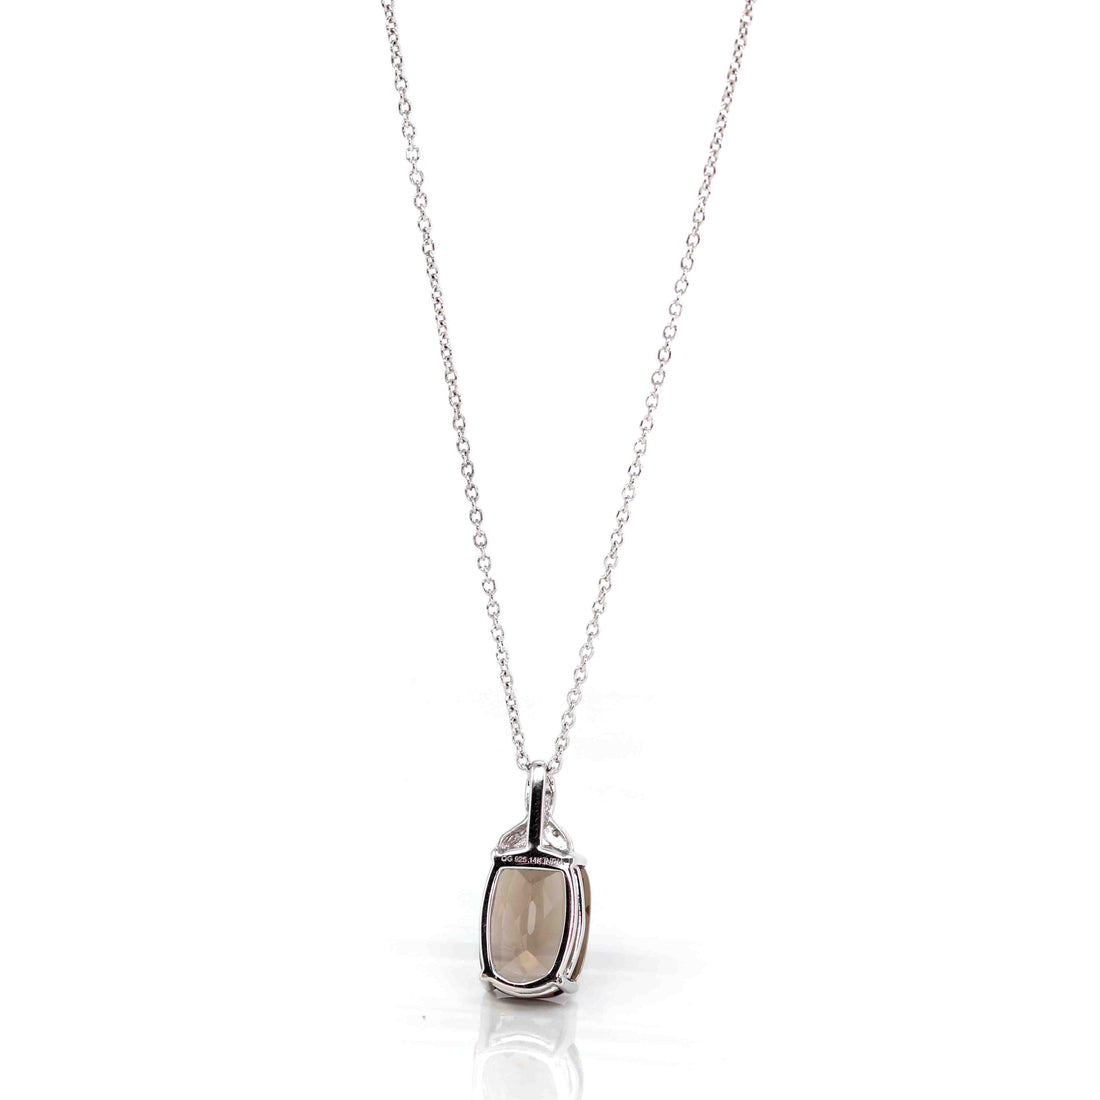 Buy A Touch of Smoky Topaz Stone Gold Necklace Online in India | Zariin